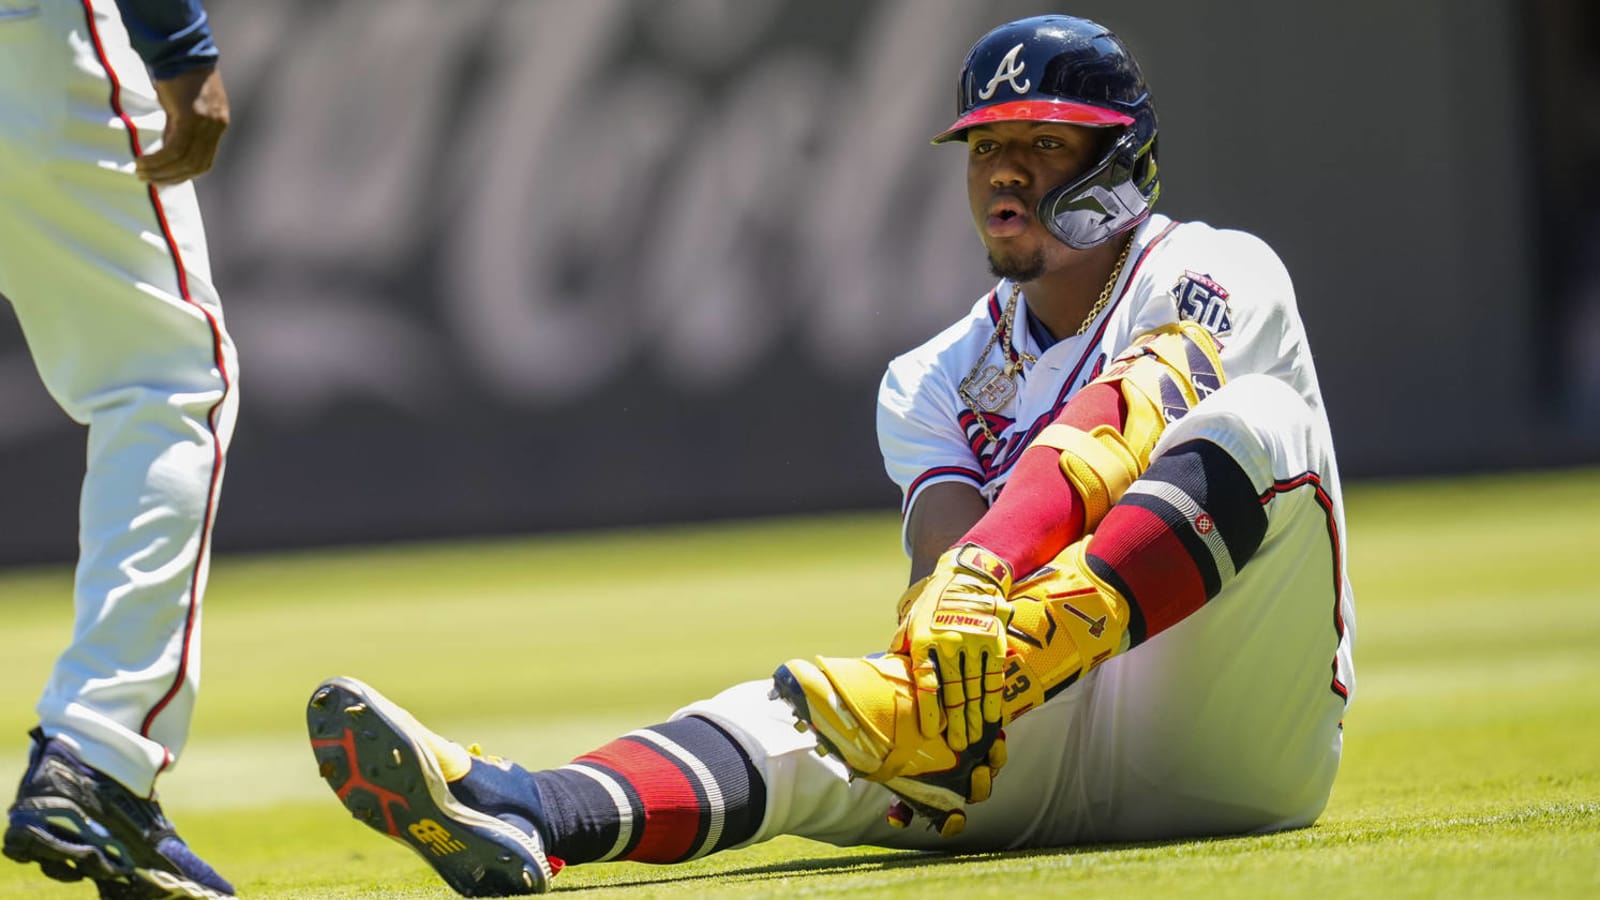 MLB News Roundup: Atlanta Braves superstar Ronald Acuna Jr. to miss time  after unfortunate groin injury; Seattle Mariners set to face Toronto Blue  Jays at limited capacity due to vaccine mandate 